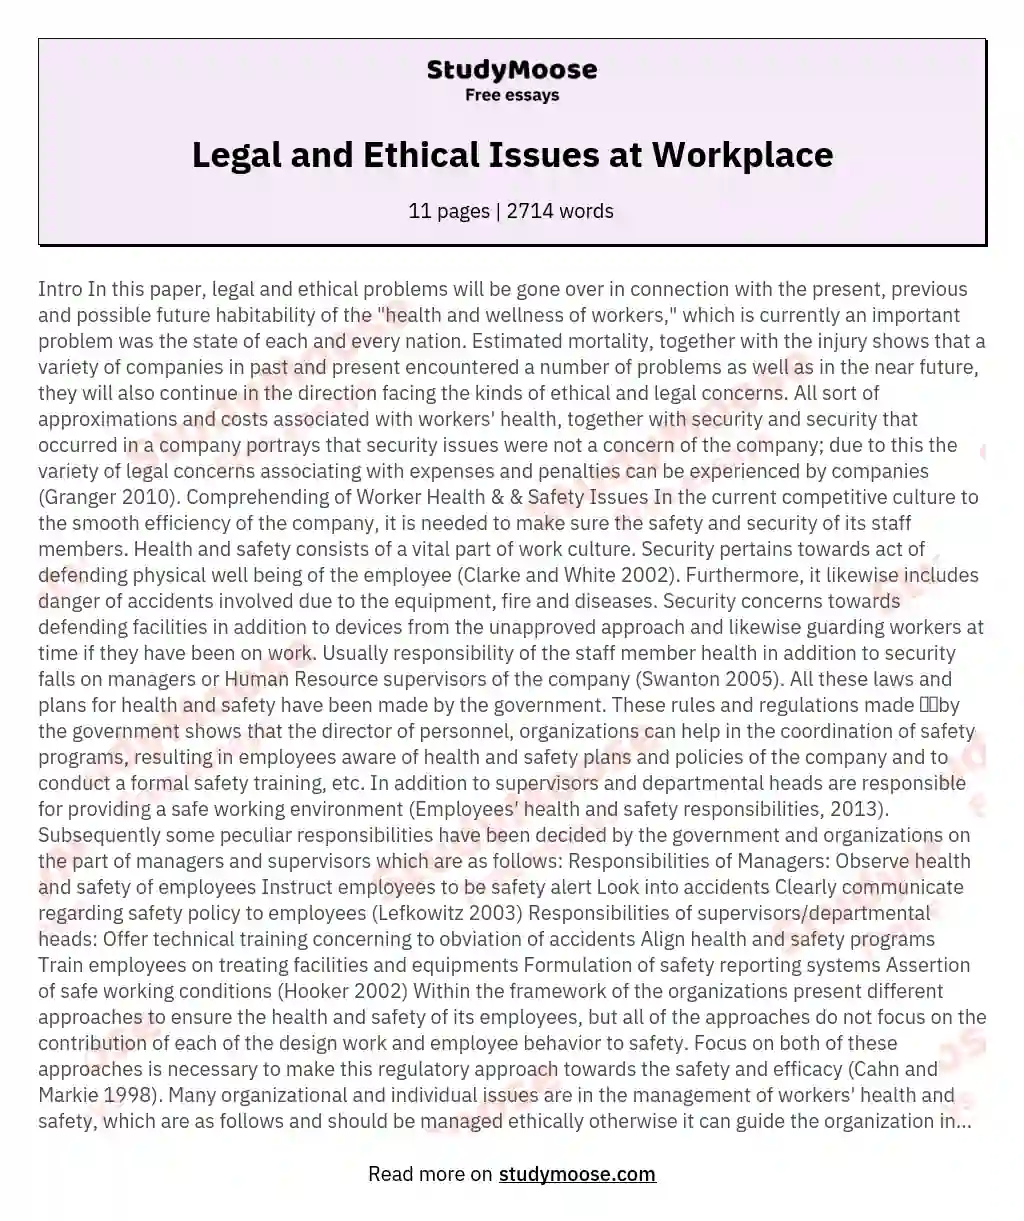 Legal and Ethical Issues at Workplace